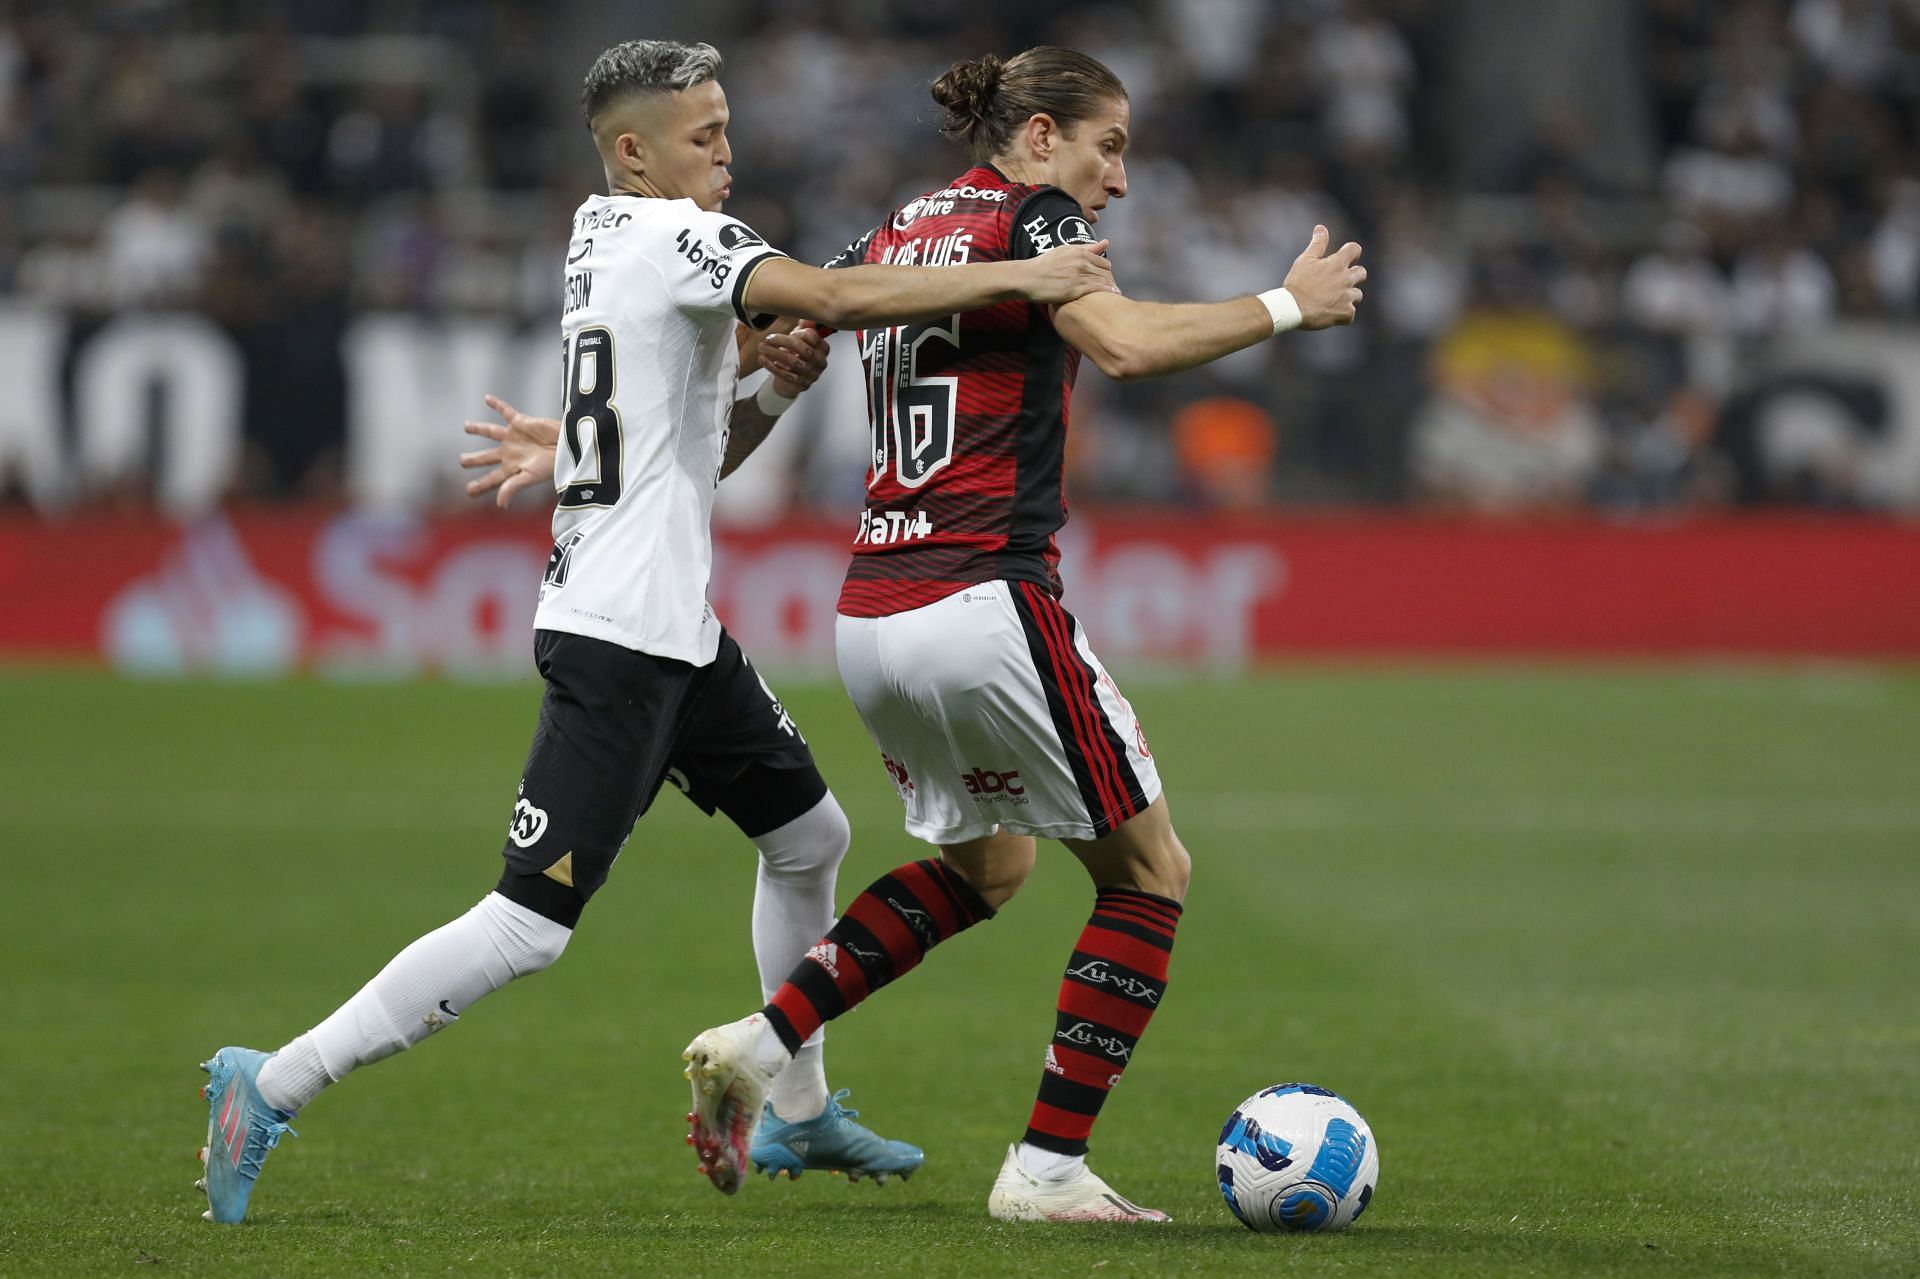 Flamengo and Corinthians will square off in their Copa Libertadores fixture on Tuesday